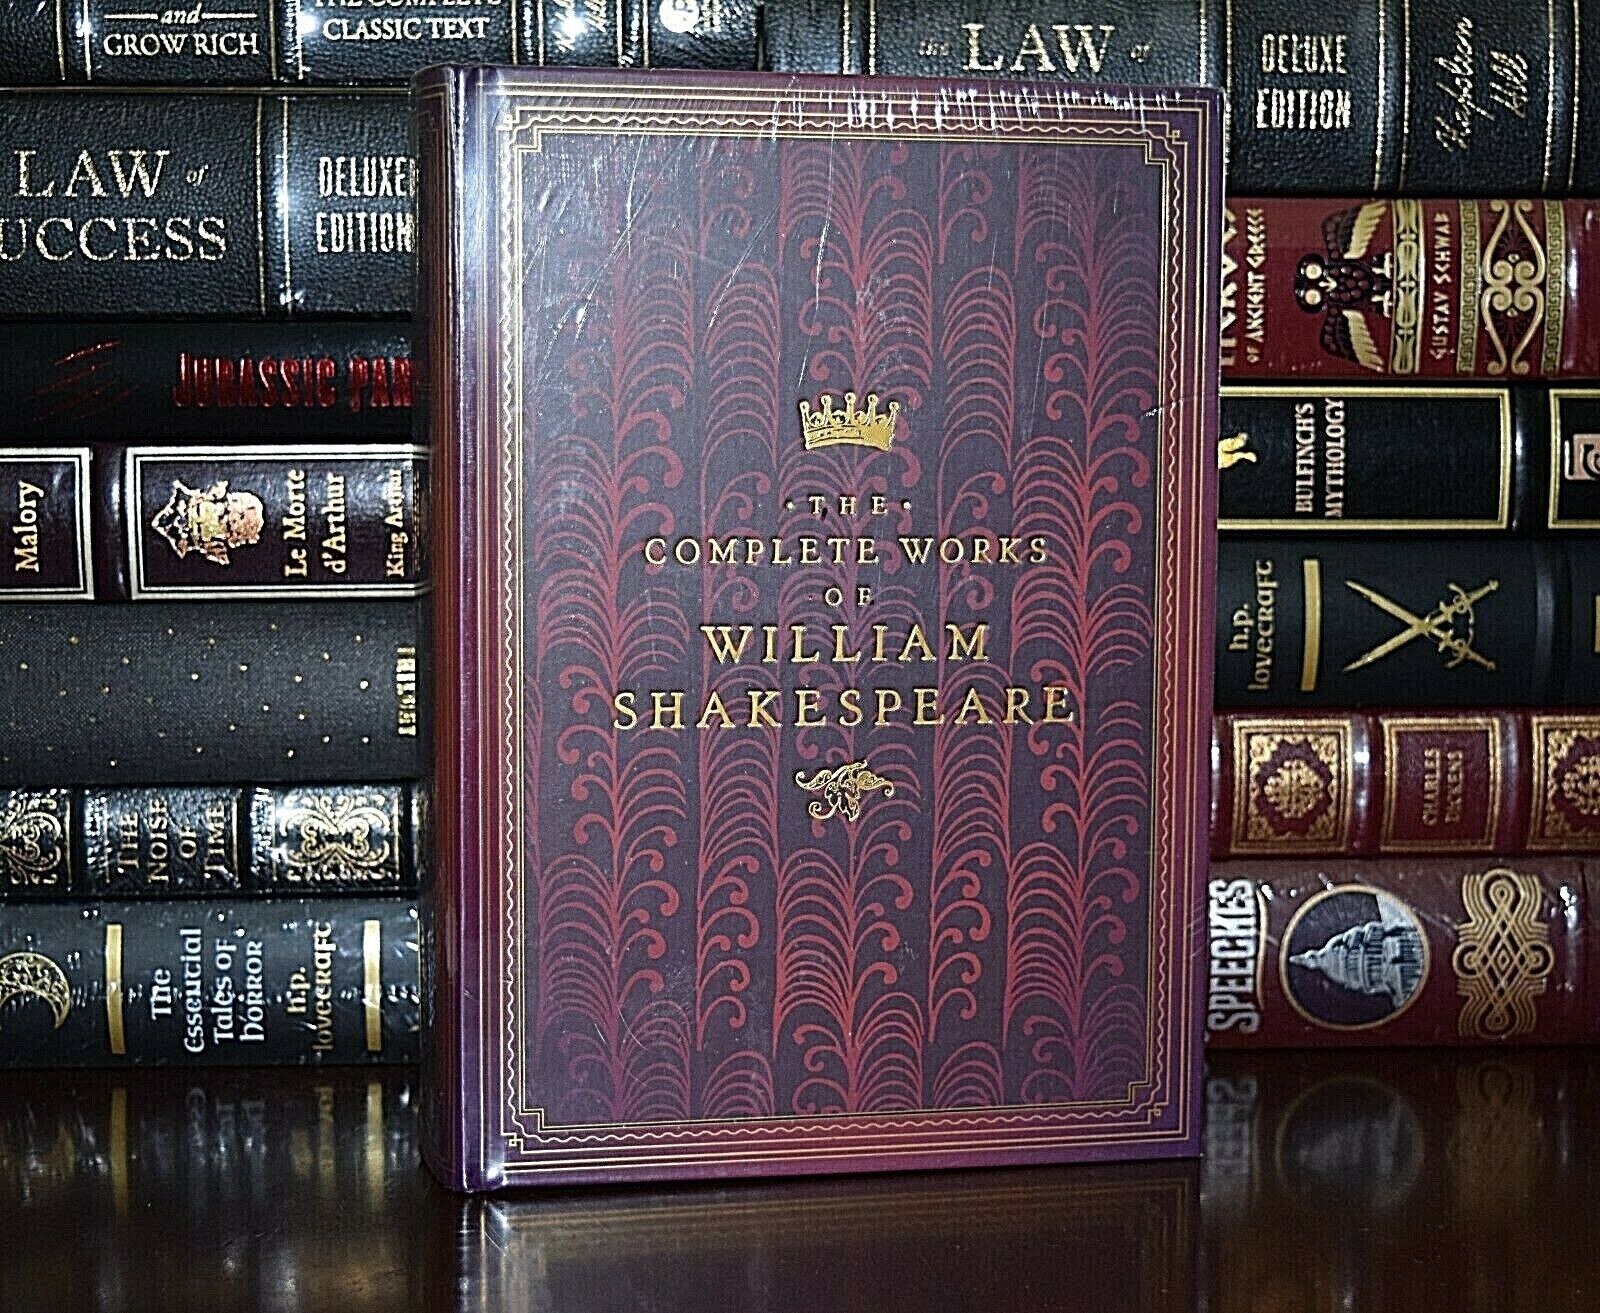 The Complete Works of William Shakespeare New Sealed Hardcover Collectible